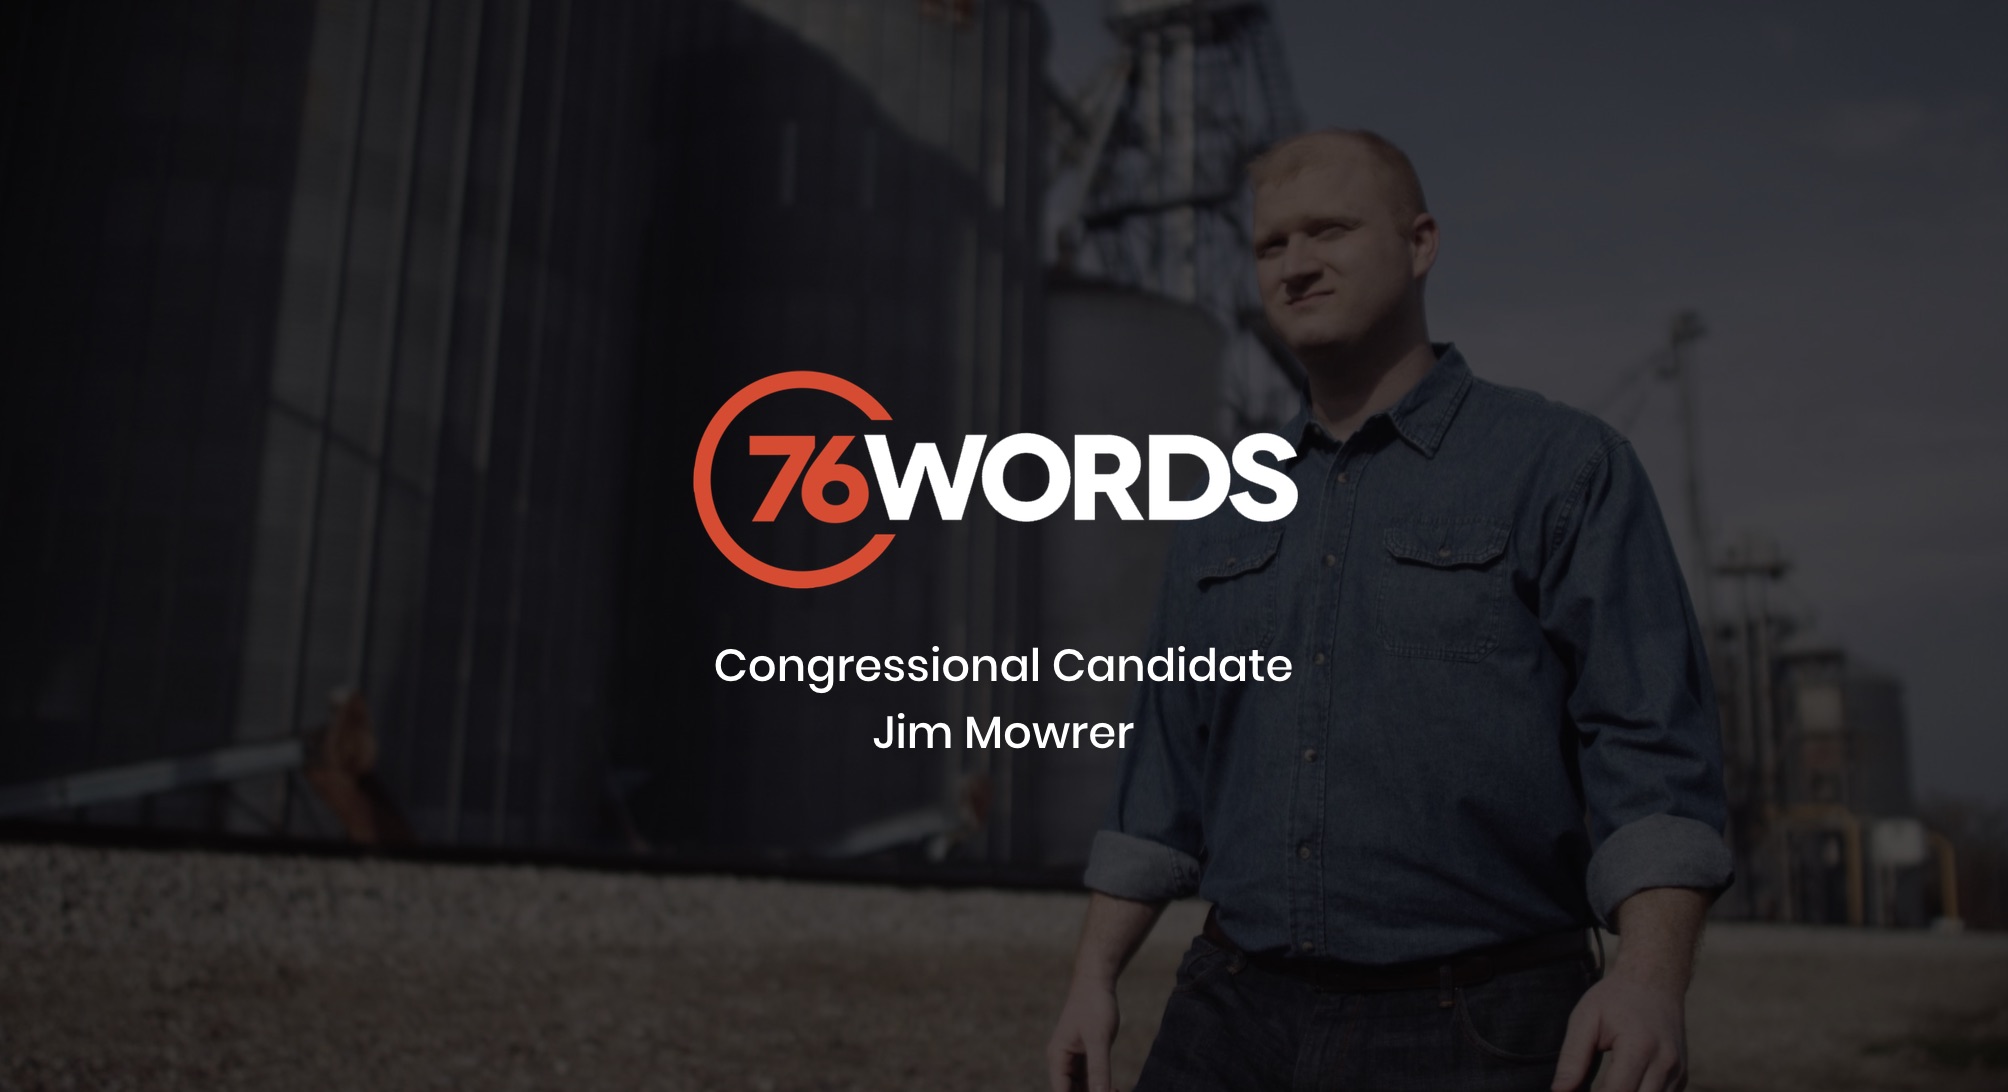 IU C&I Studios Page Orange and white 76 Words logo with dimmed background of Congressional Candidate Jim Mowrer wearing jean shirt and black jeans walking by gray silos